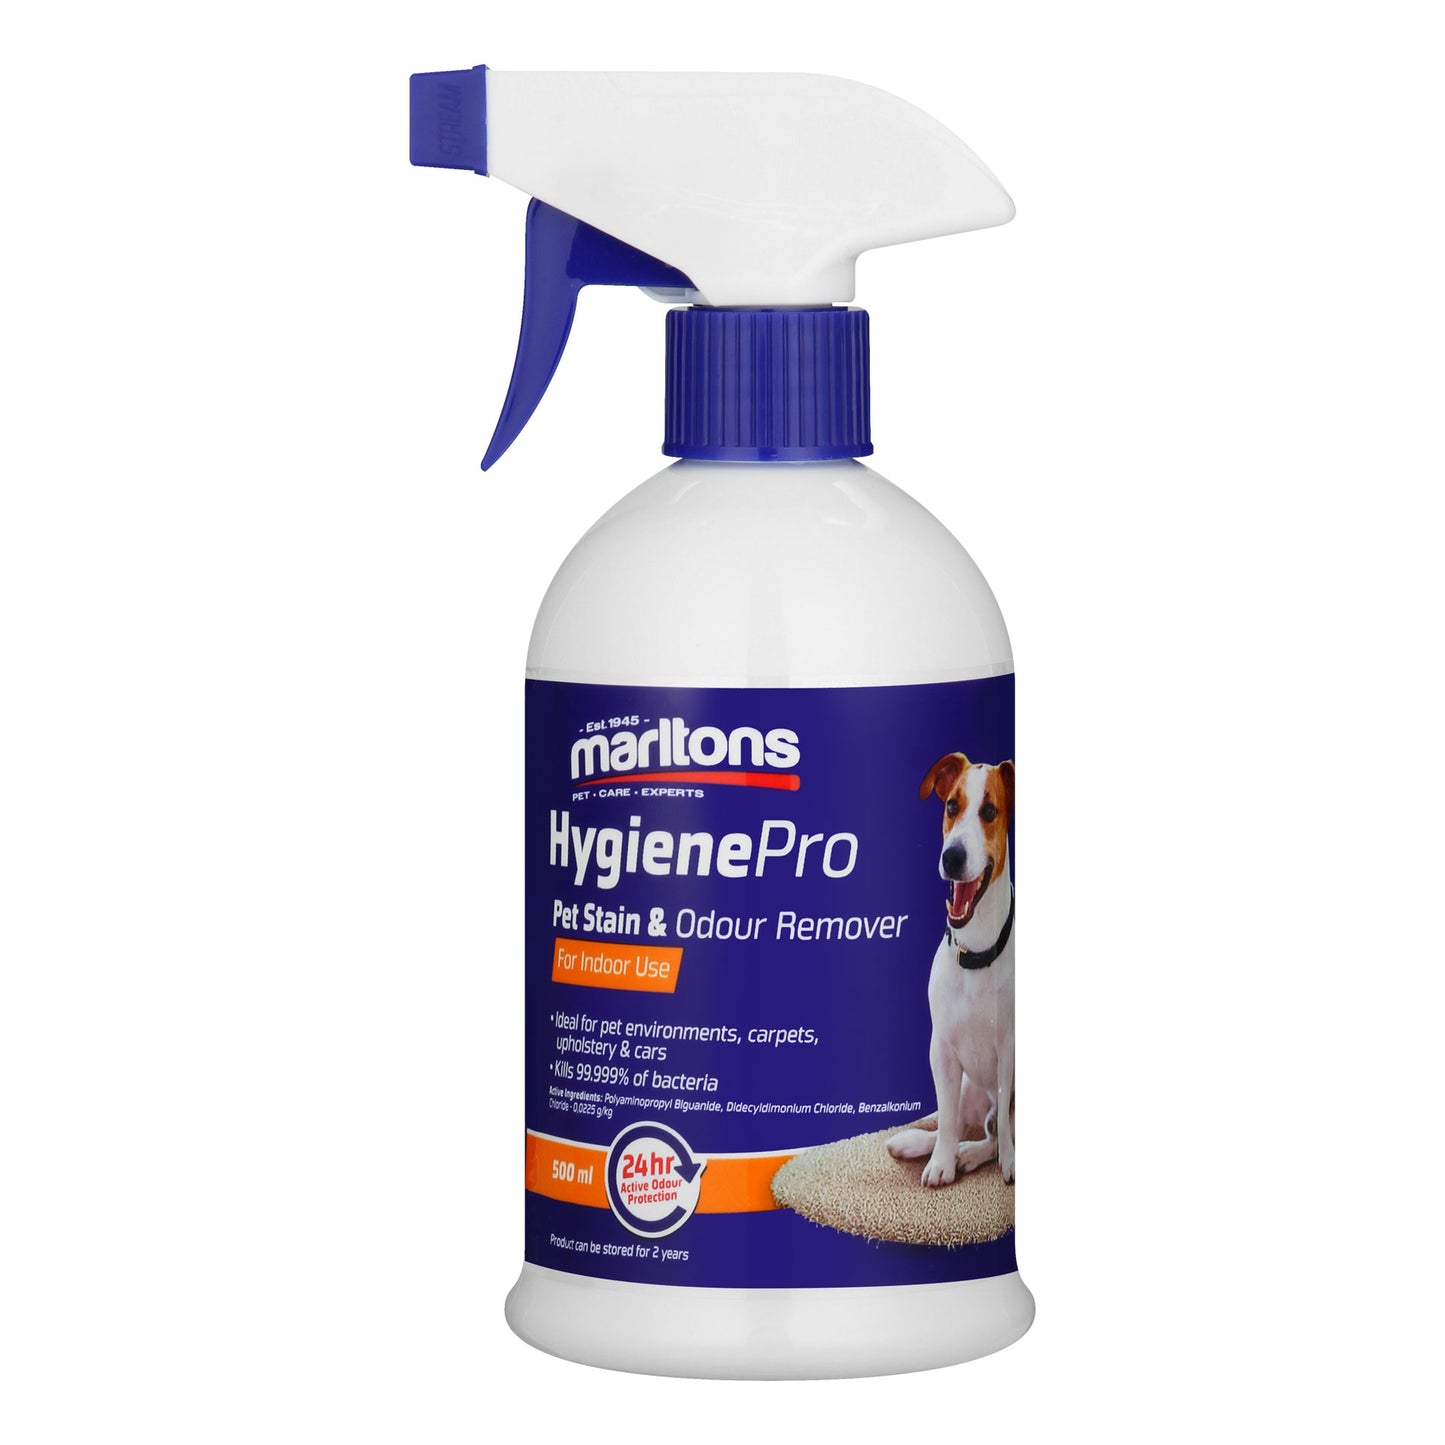 Marltons HygienePro Pet Stain And Odour Remover